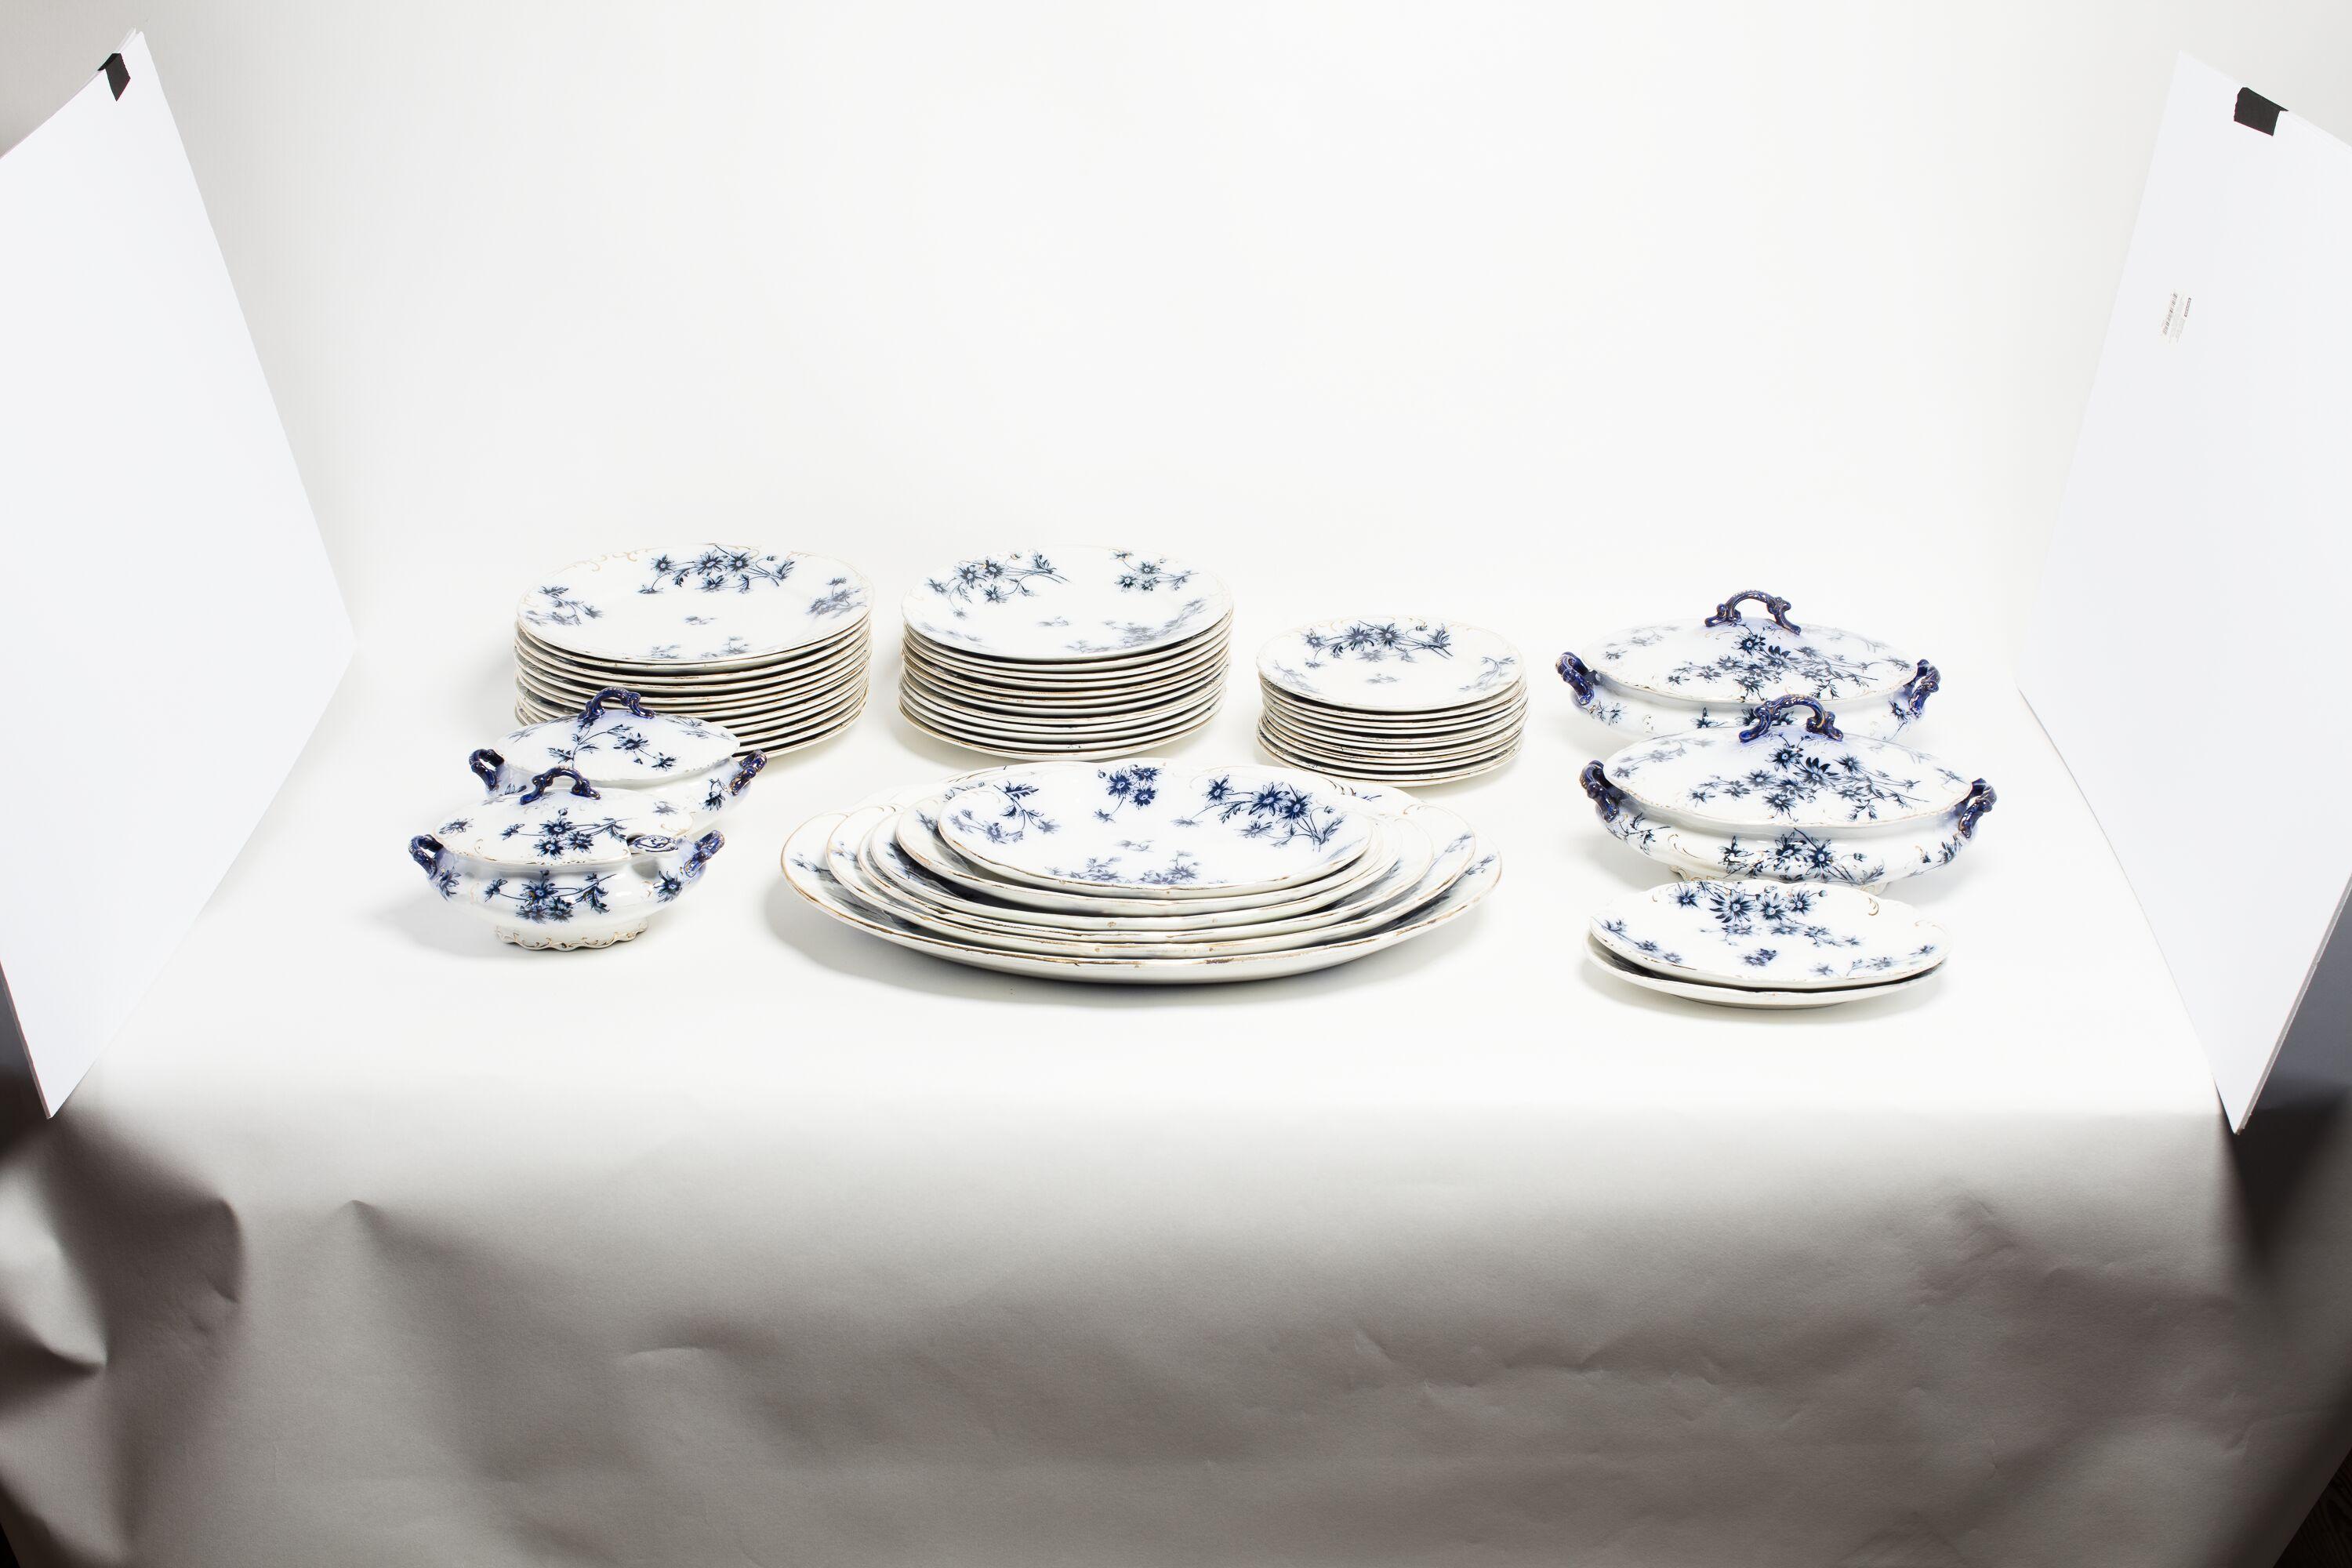 Antique flow blue English dinnerware set, ca 1860. Wear consistent with age and use. Minor chips. Set of 12 dinner plates 10.5